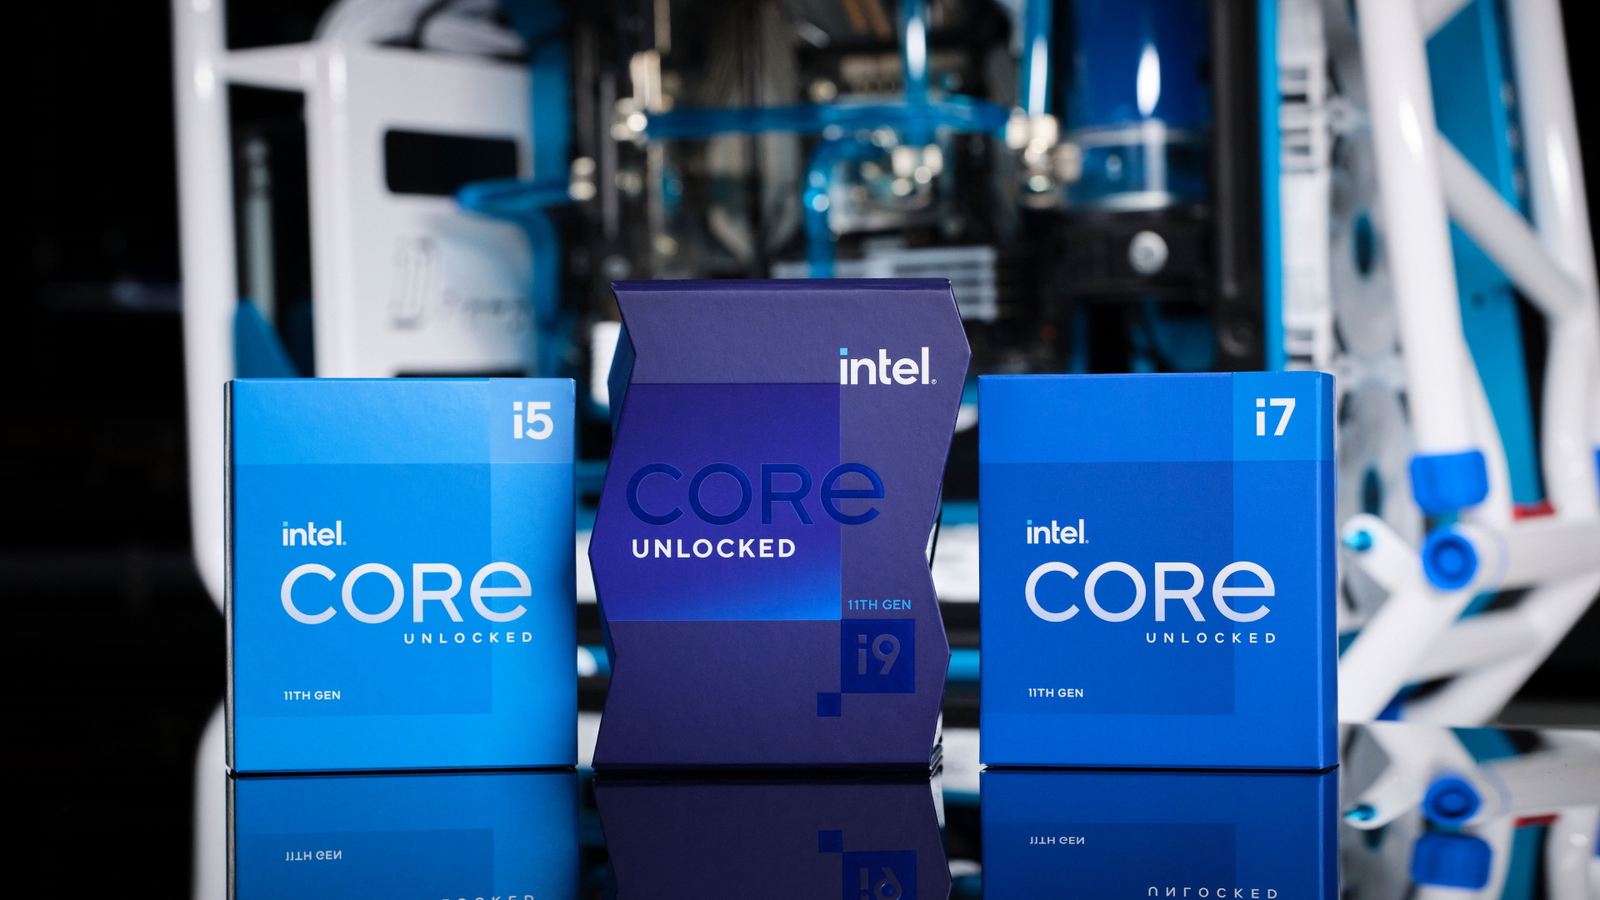 Intel 10th Gen Core i9-10900K Review: Should You Upgrade Or Buy AMD?